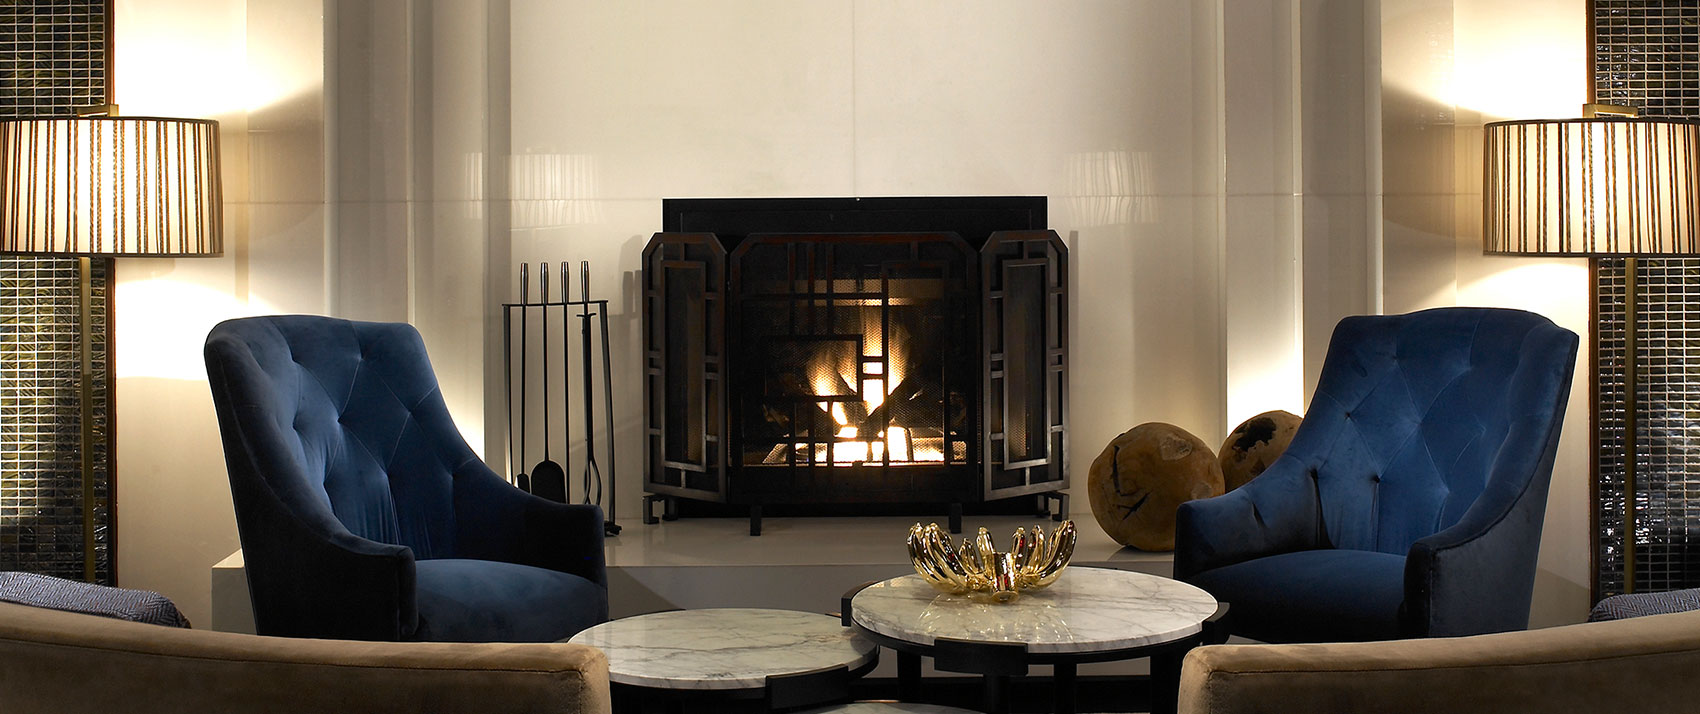 Kimpton Hotel Palomar Philadelphia lobby living room with seating, circular marbletop coffee tables, and a fireplace